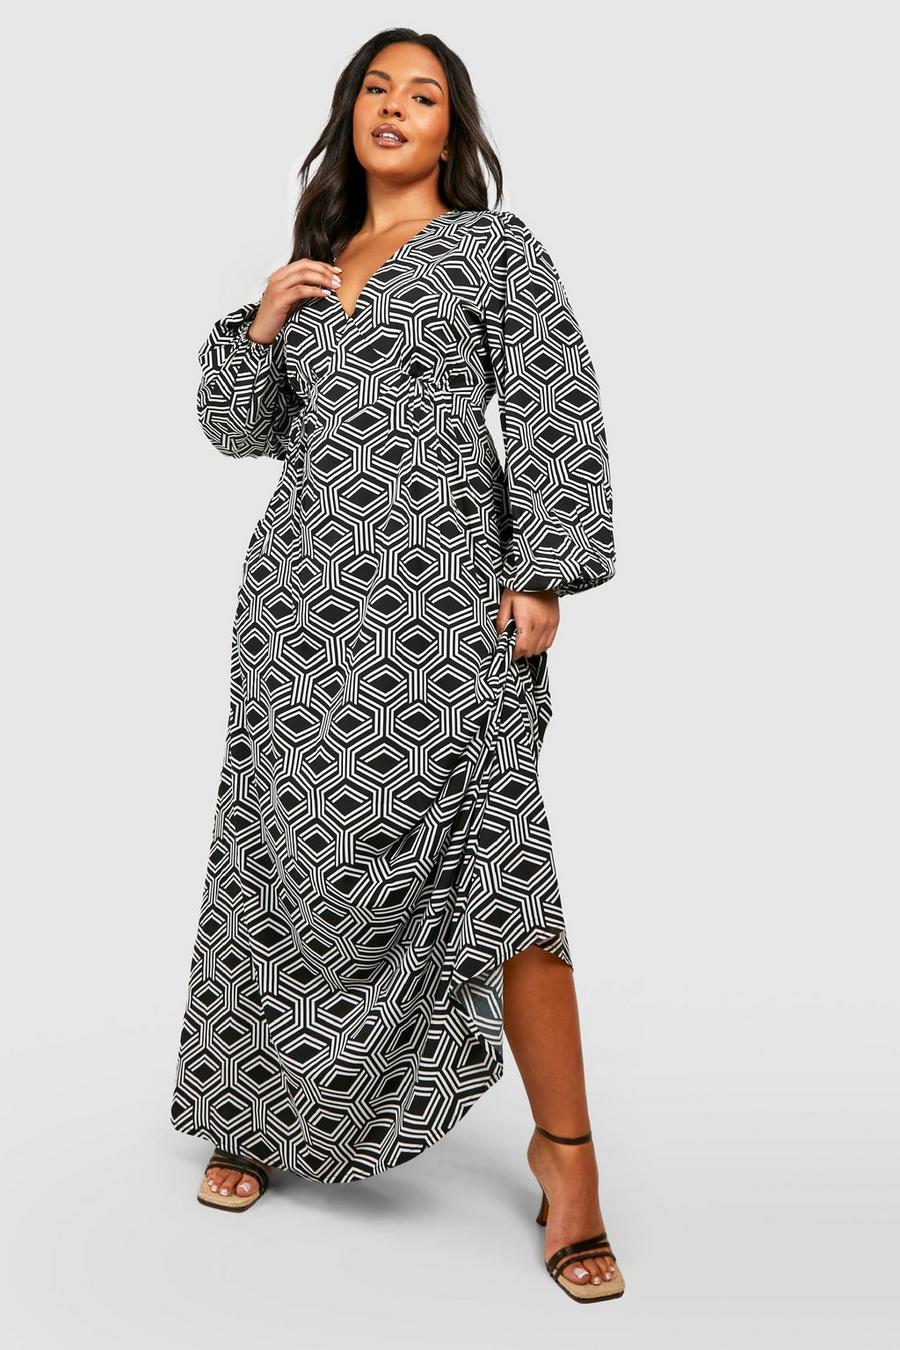 New In Dresses | All New In Dresses | boohoo Canada